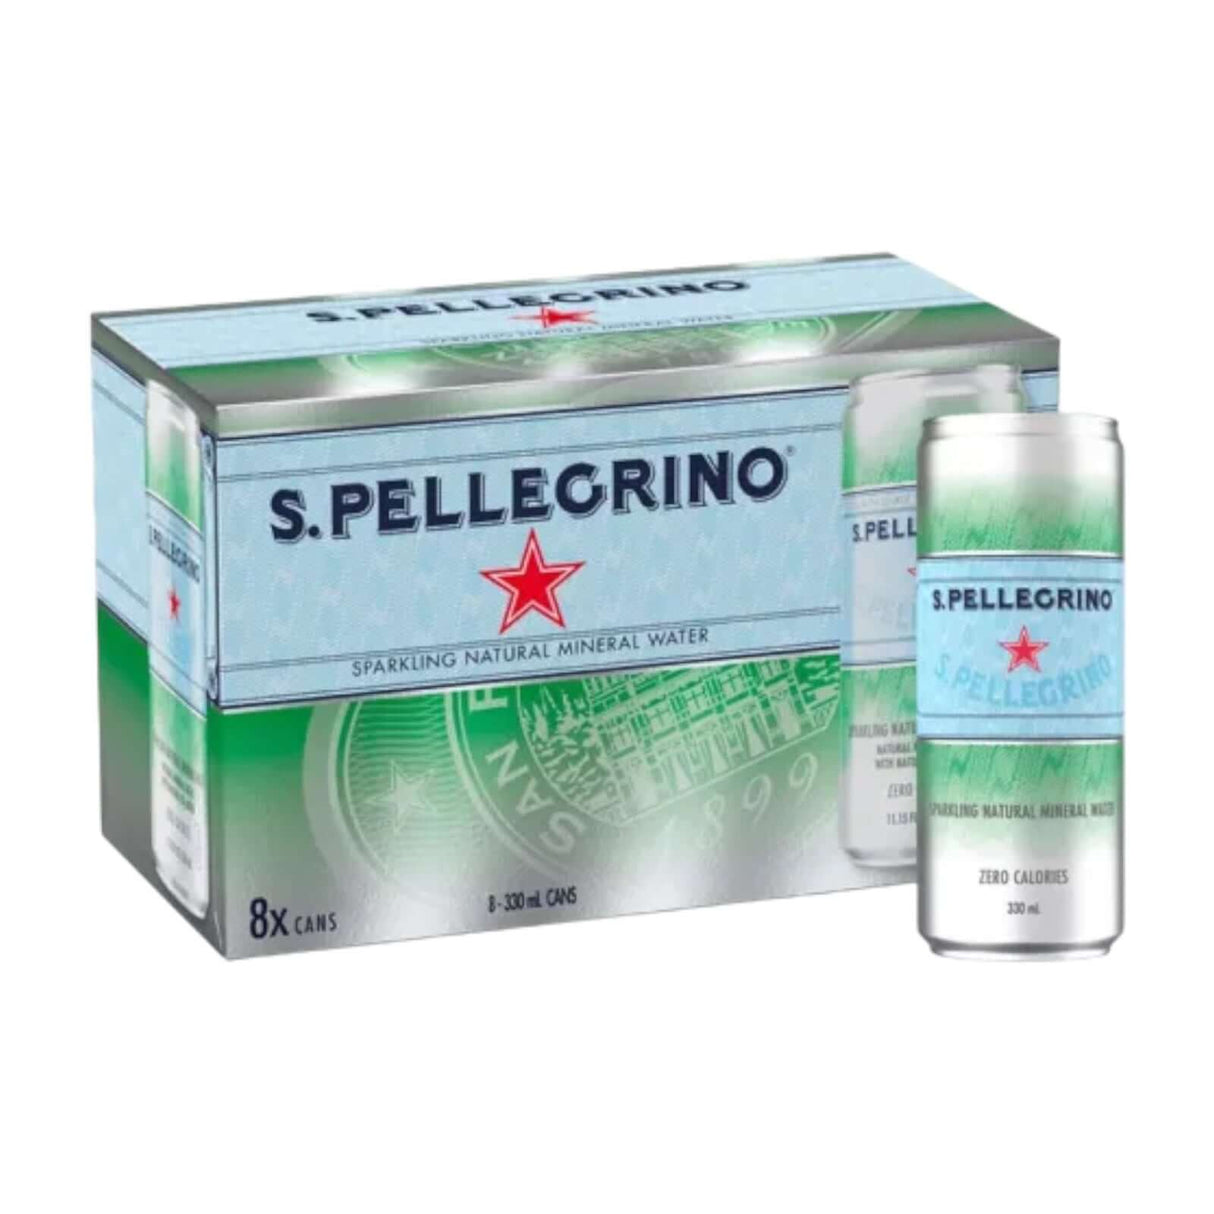 S.Pellegrino Unflavored Sparkling Natural Mineral Water